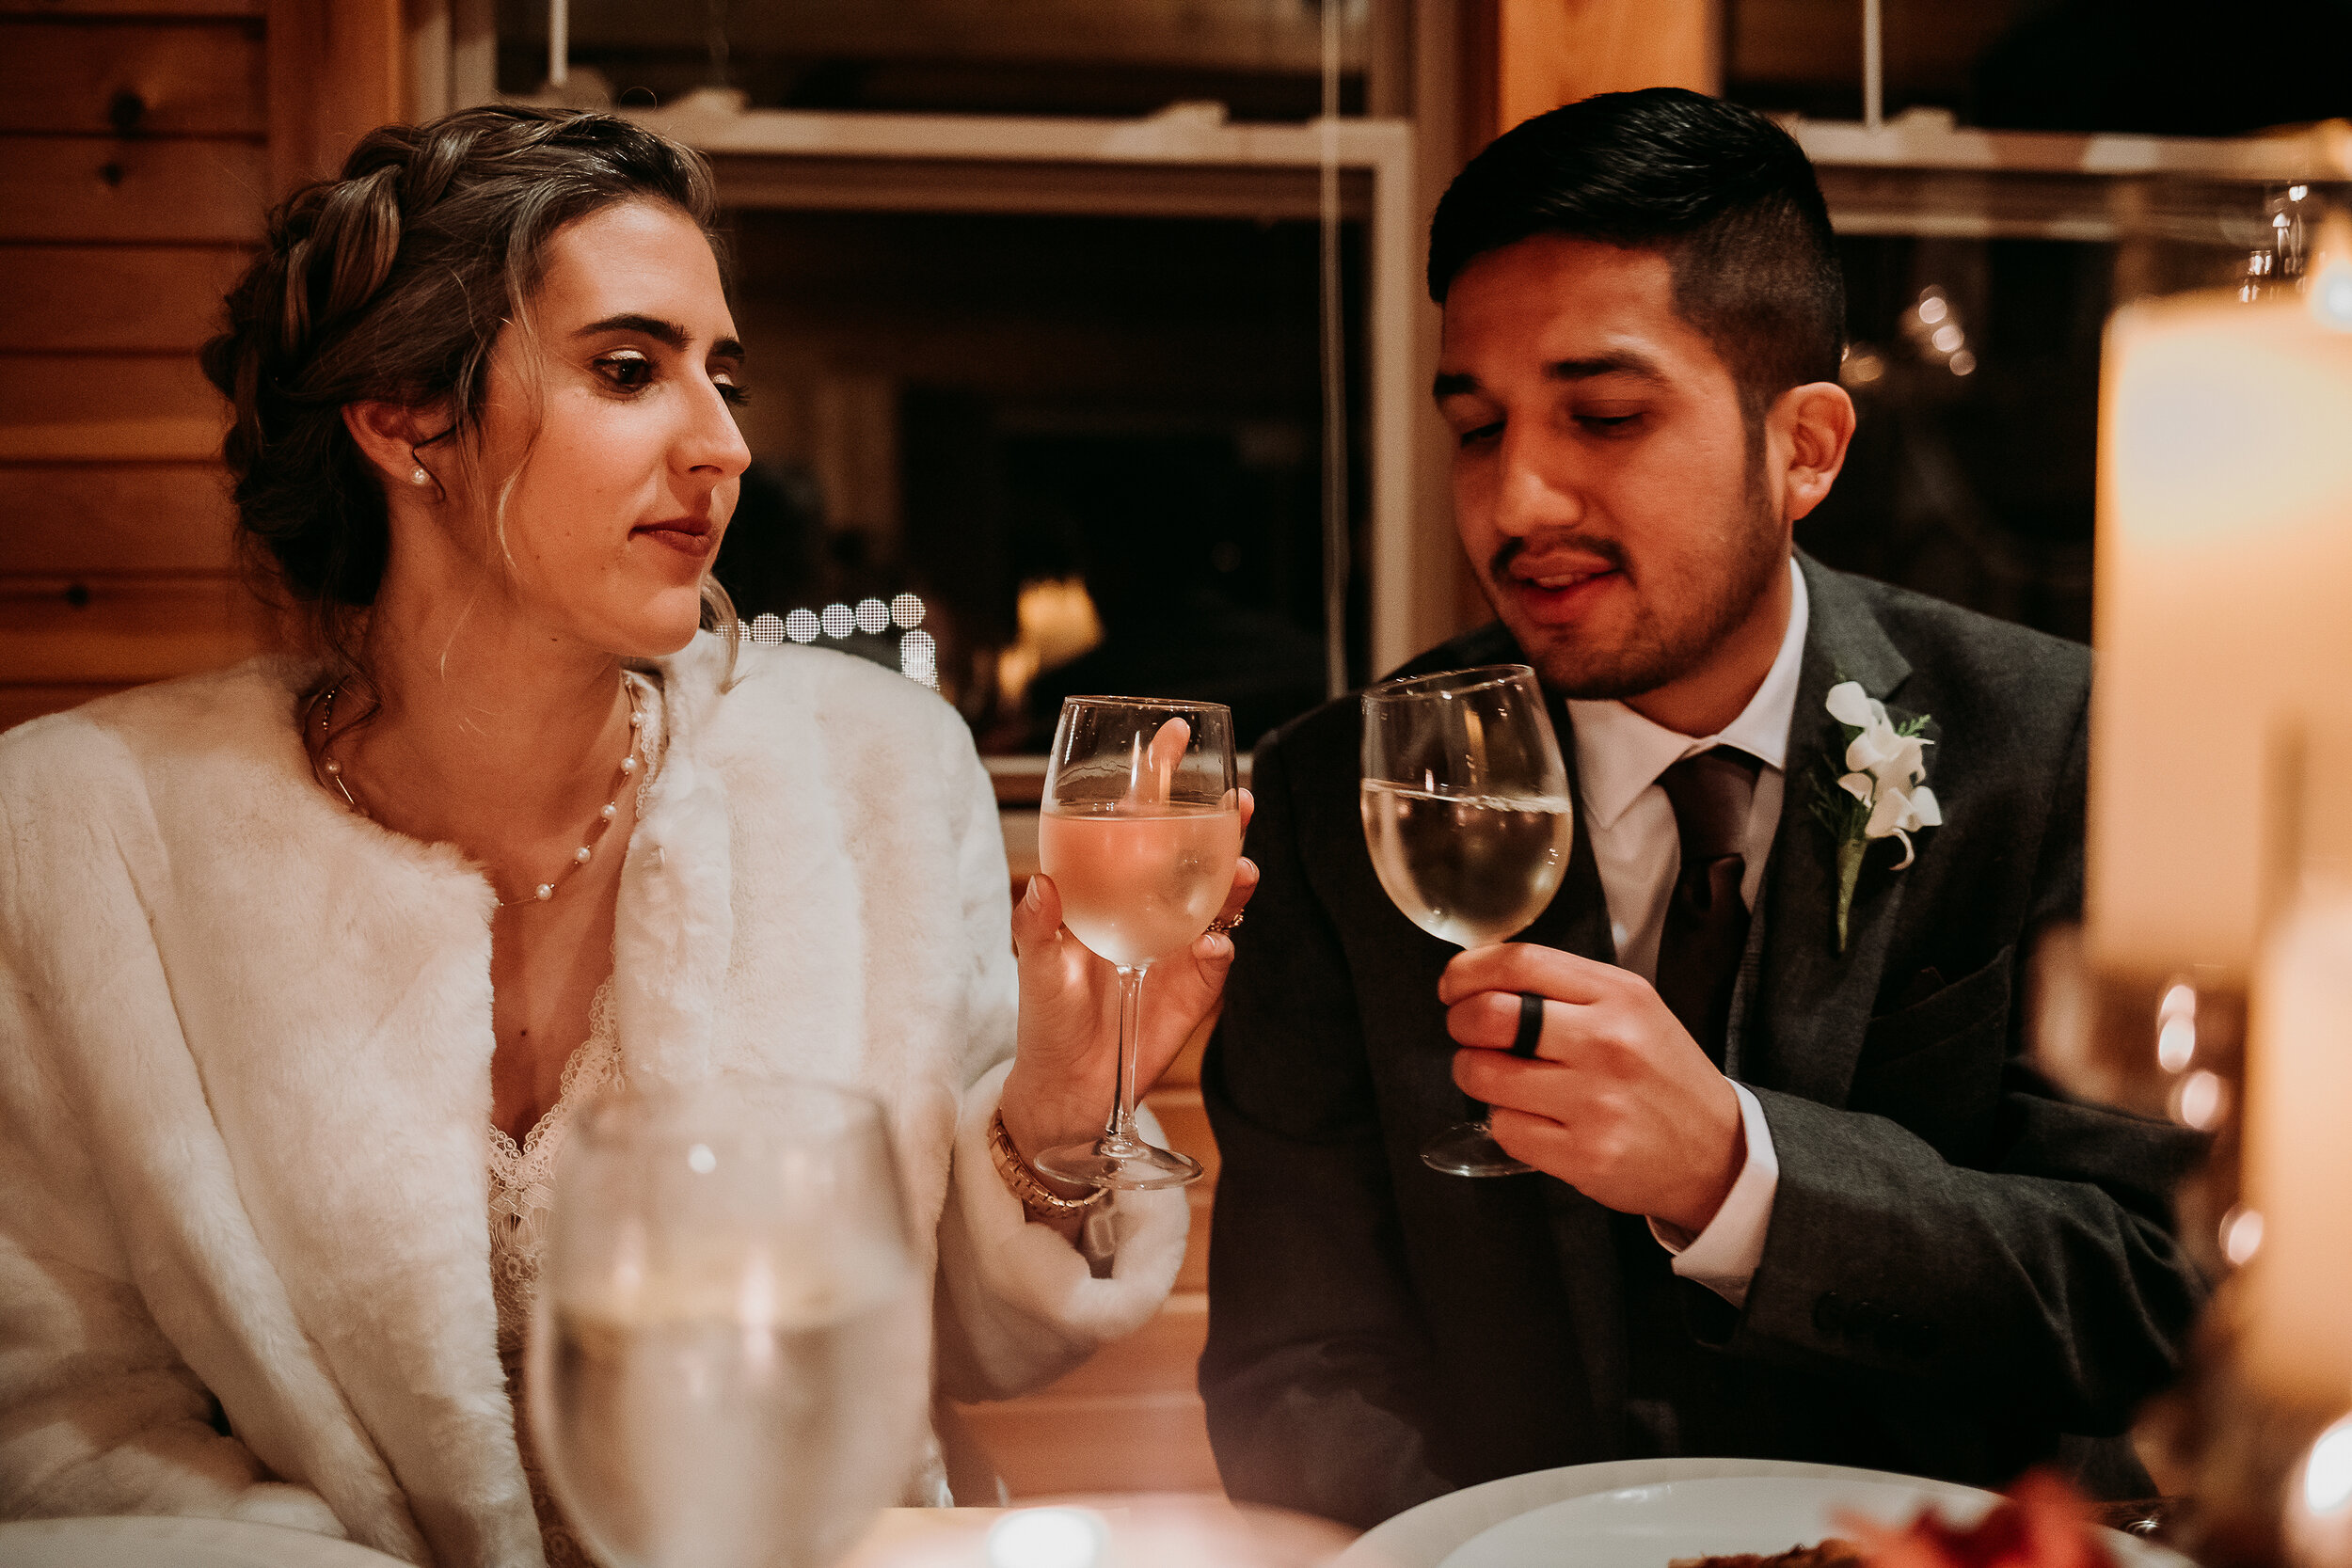  Kindred + Co. Photography captures romantic dinner moments following an evening treehouse elopement at the Grand Barn at the Mohicans. candlelit wedding dinner, elopement dinner, wedding fur shawl, bohemian wedding braided updo, pearl wedding neckla